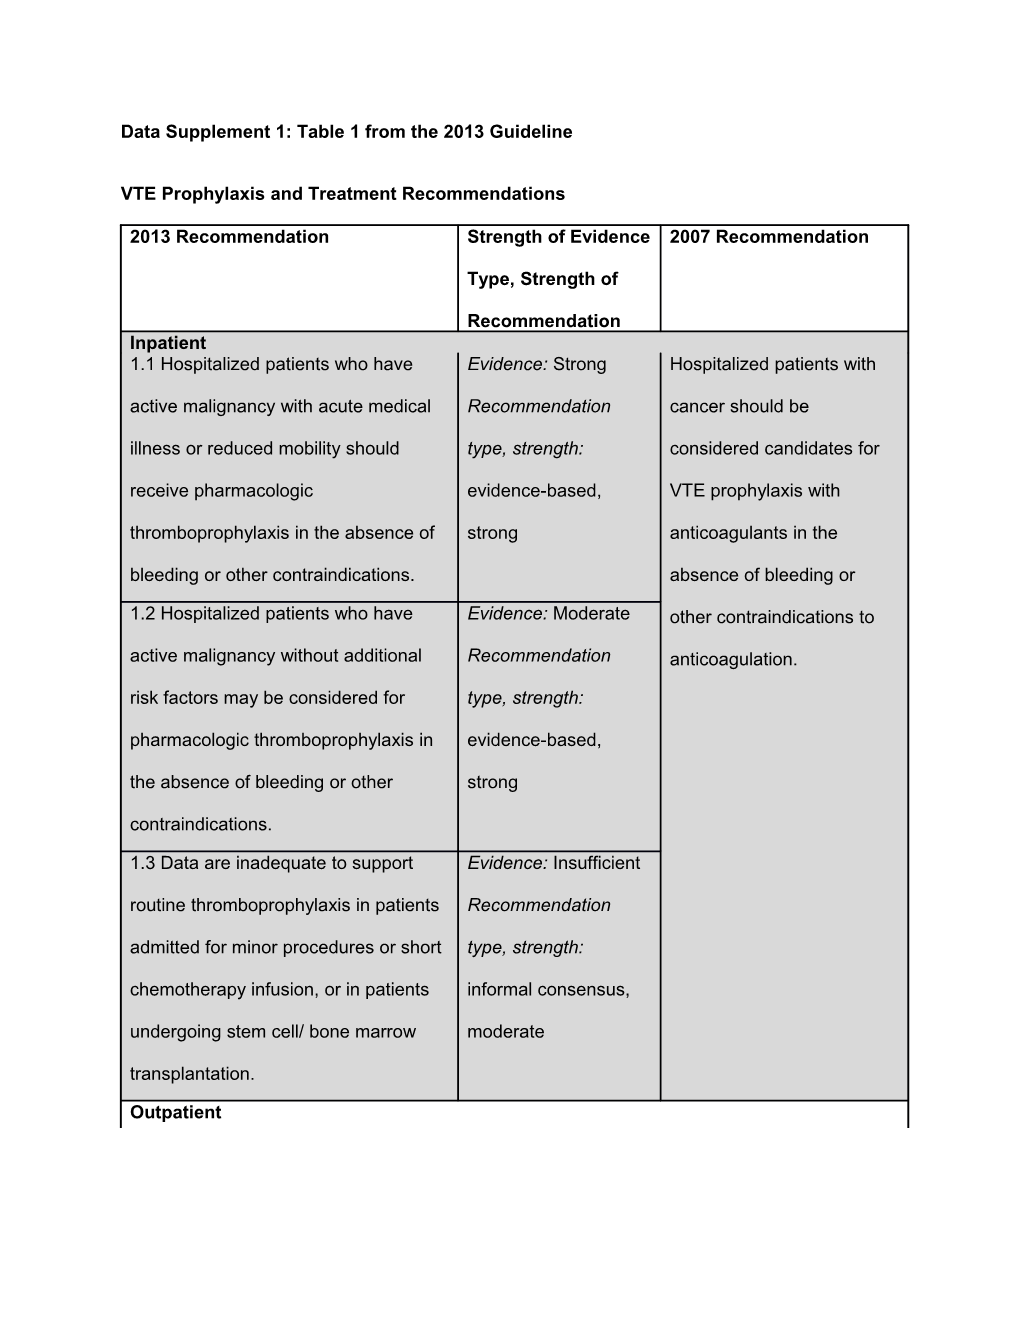 TITLE: Venous Thromboembolism Prophylaxis and Treatment in Patients with Cancer: American